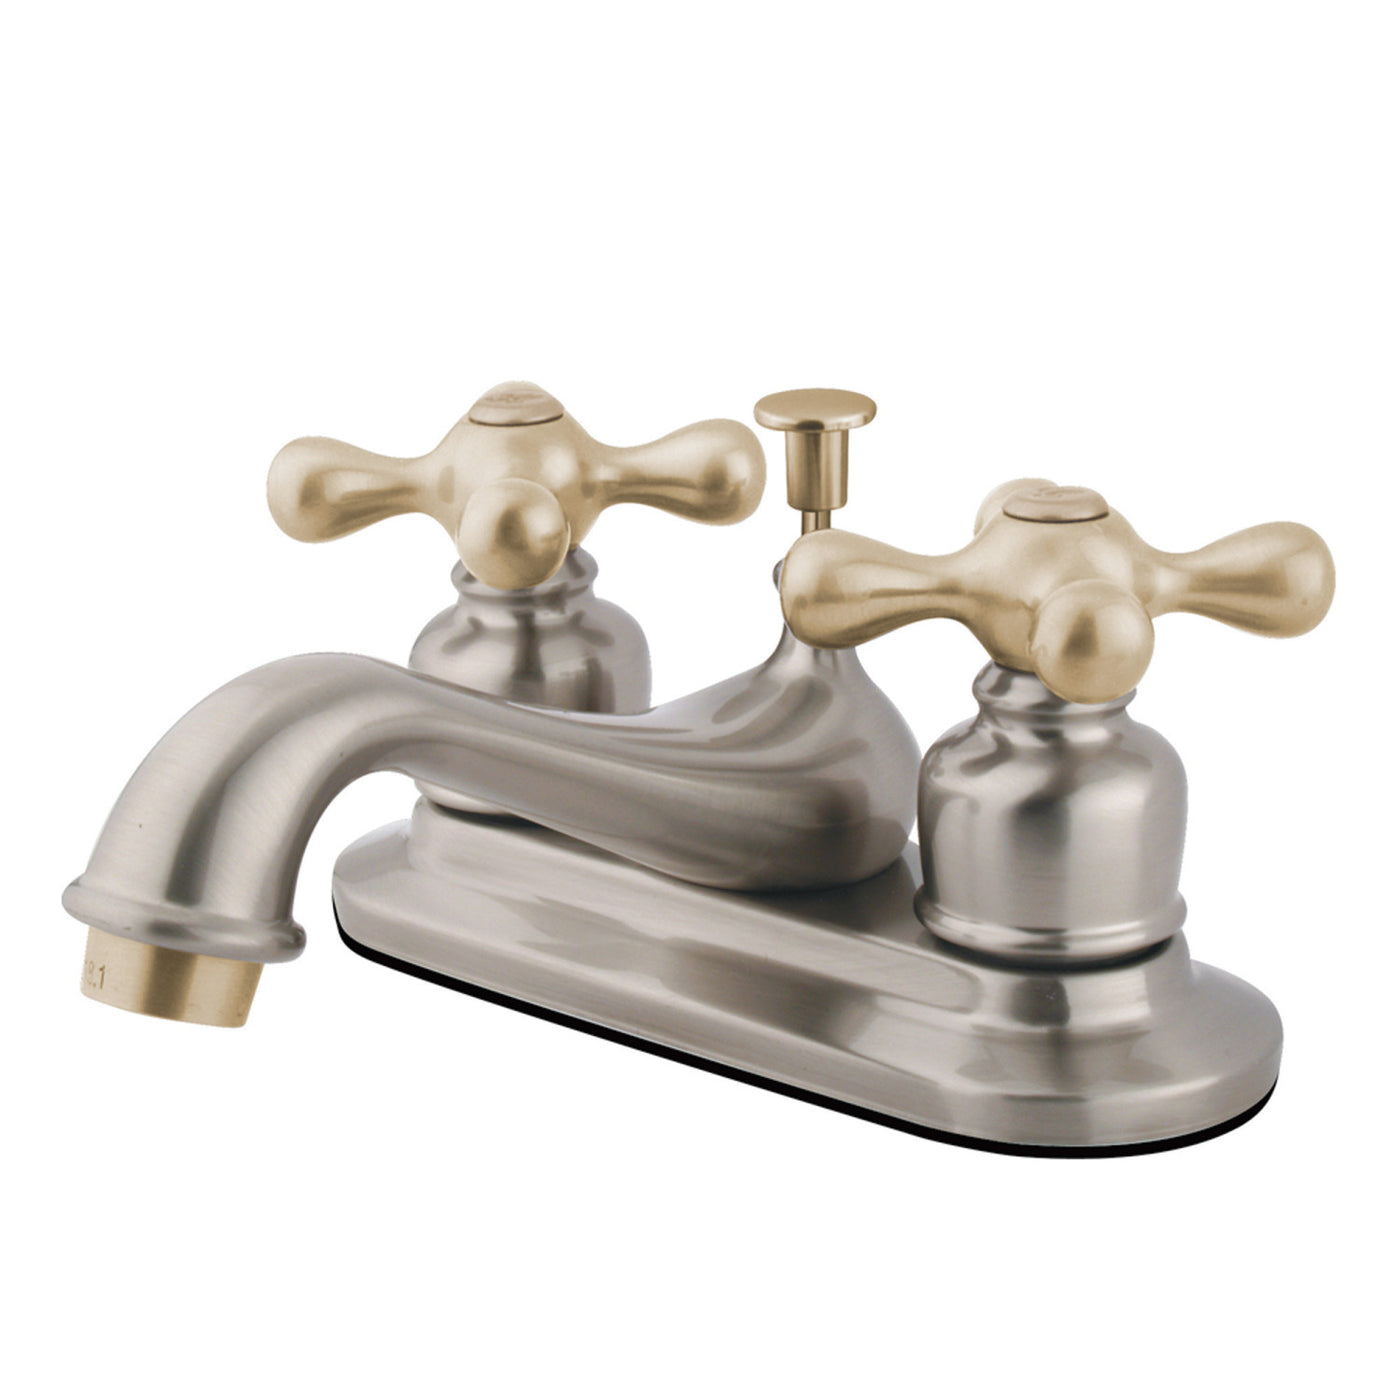 Elements of Design EB609AX 4-Inch Centerset Bathroom Faucet, Brushed Nickel/Polished Brass